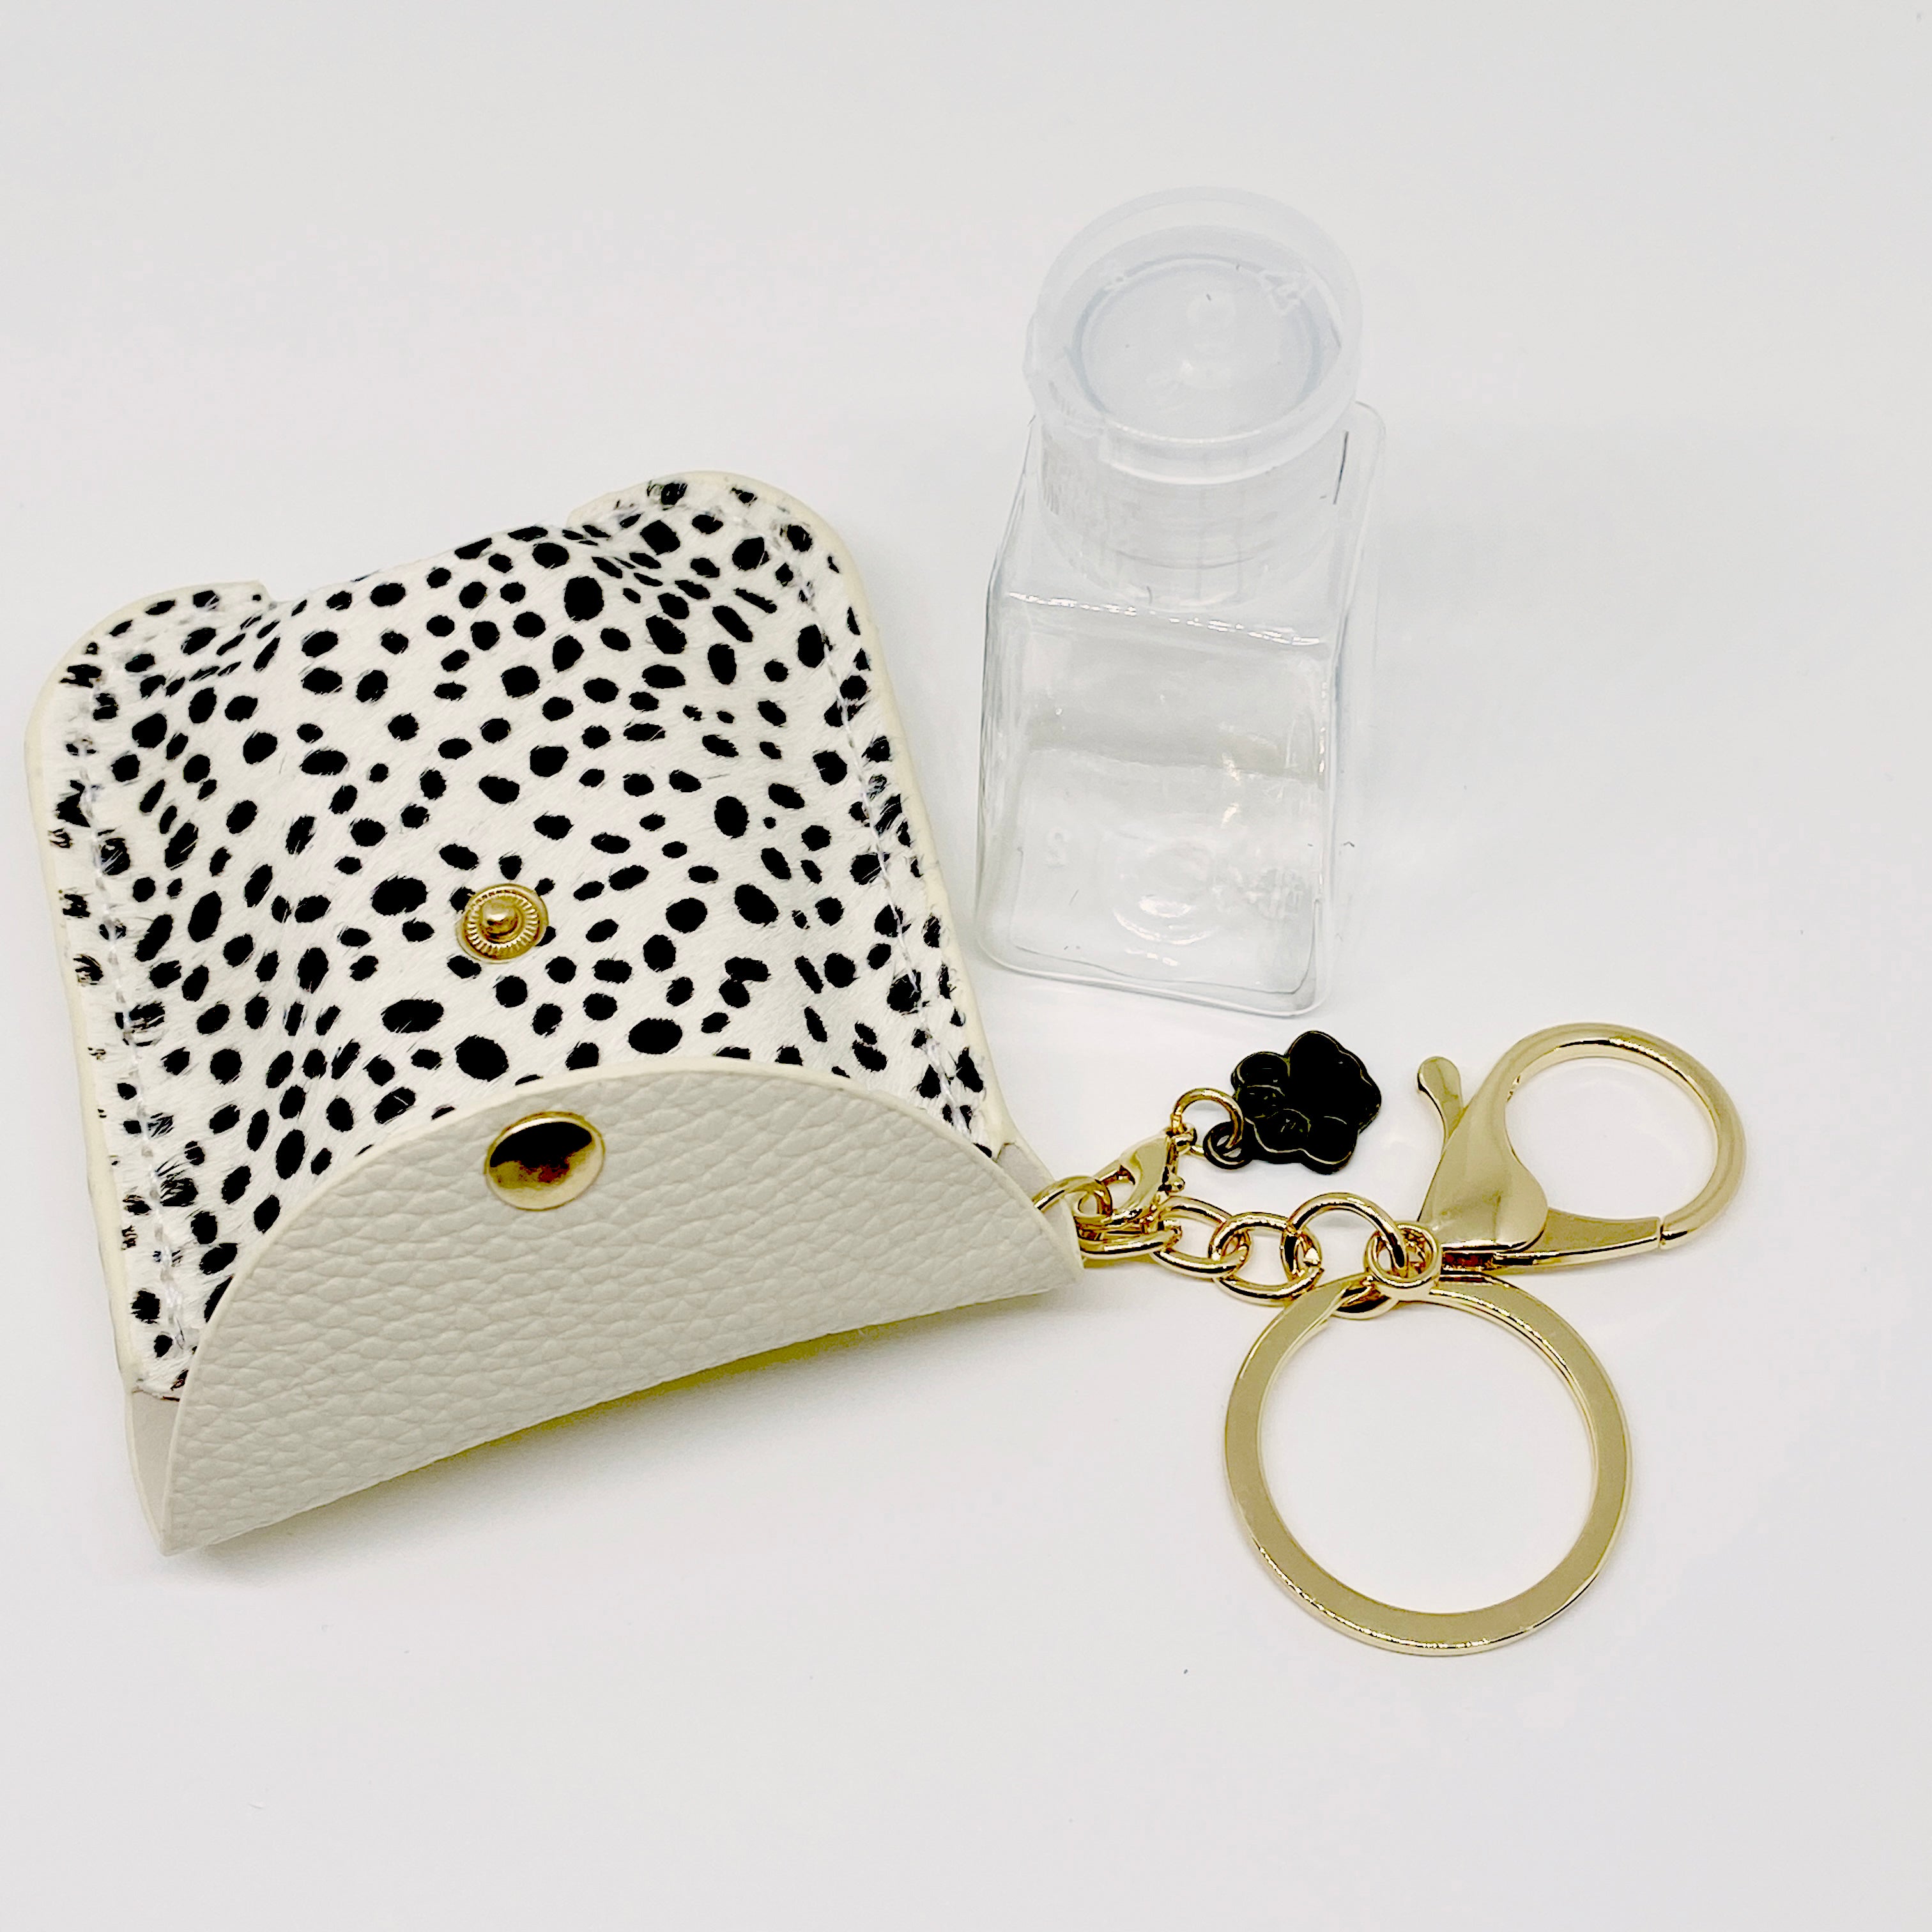 Party Girl Kim Hand Sanitizer Holder - 1 oz Travel Size Hand Sanitizer  Keychain Holder Attaches Easily to Your Purse Backpack Diaper Bag with Key  Ring and Carabiner Clip Sunflower Leopard 3